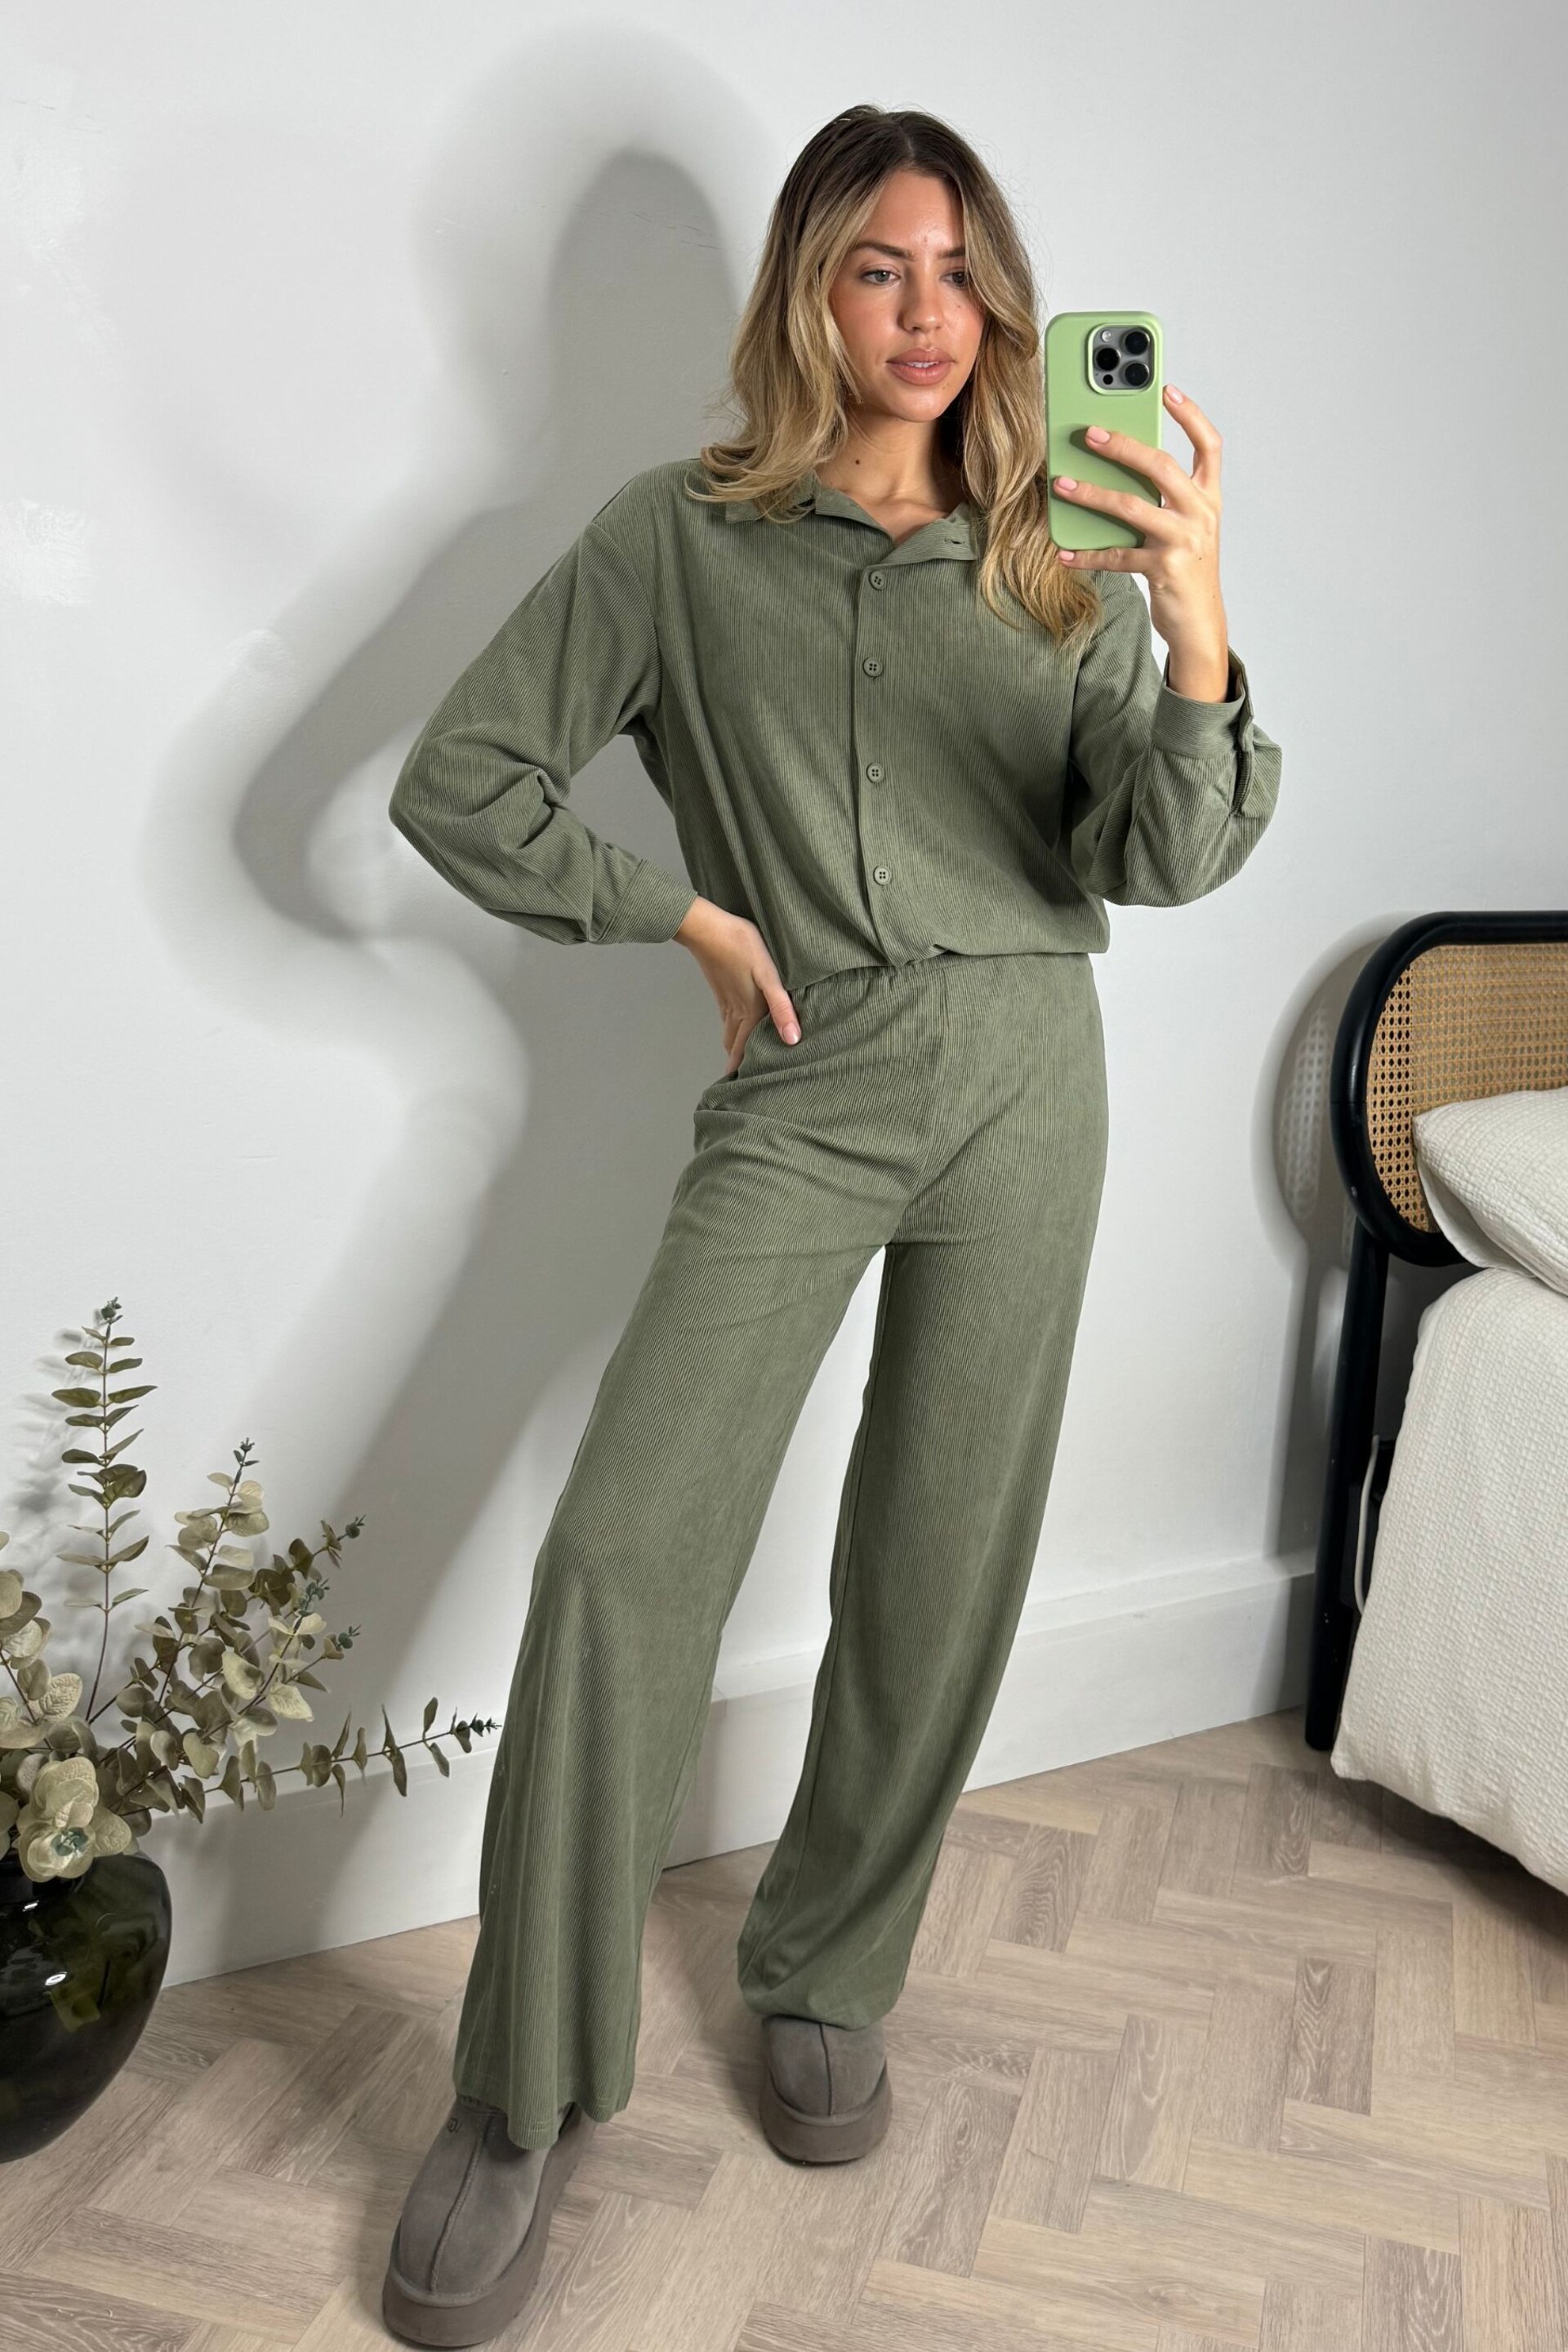 Style Cheat Green Lottie Corduroy Trousers - Image 4 of 5